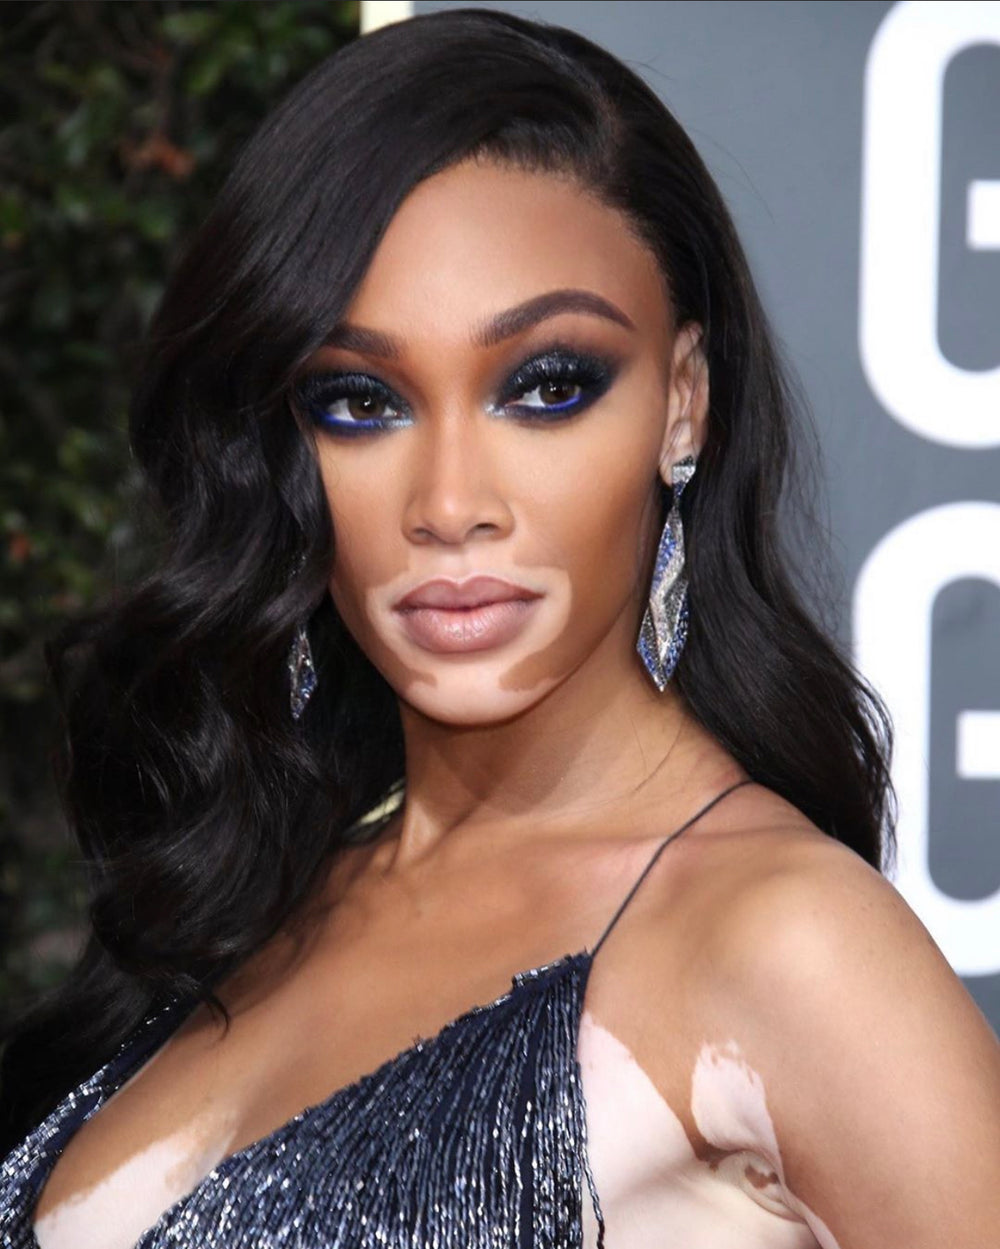 The Best Makeup Looks From The 2020 Golden Globe Awards